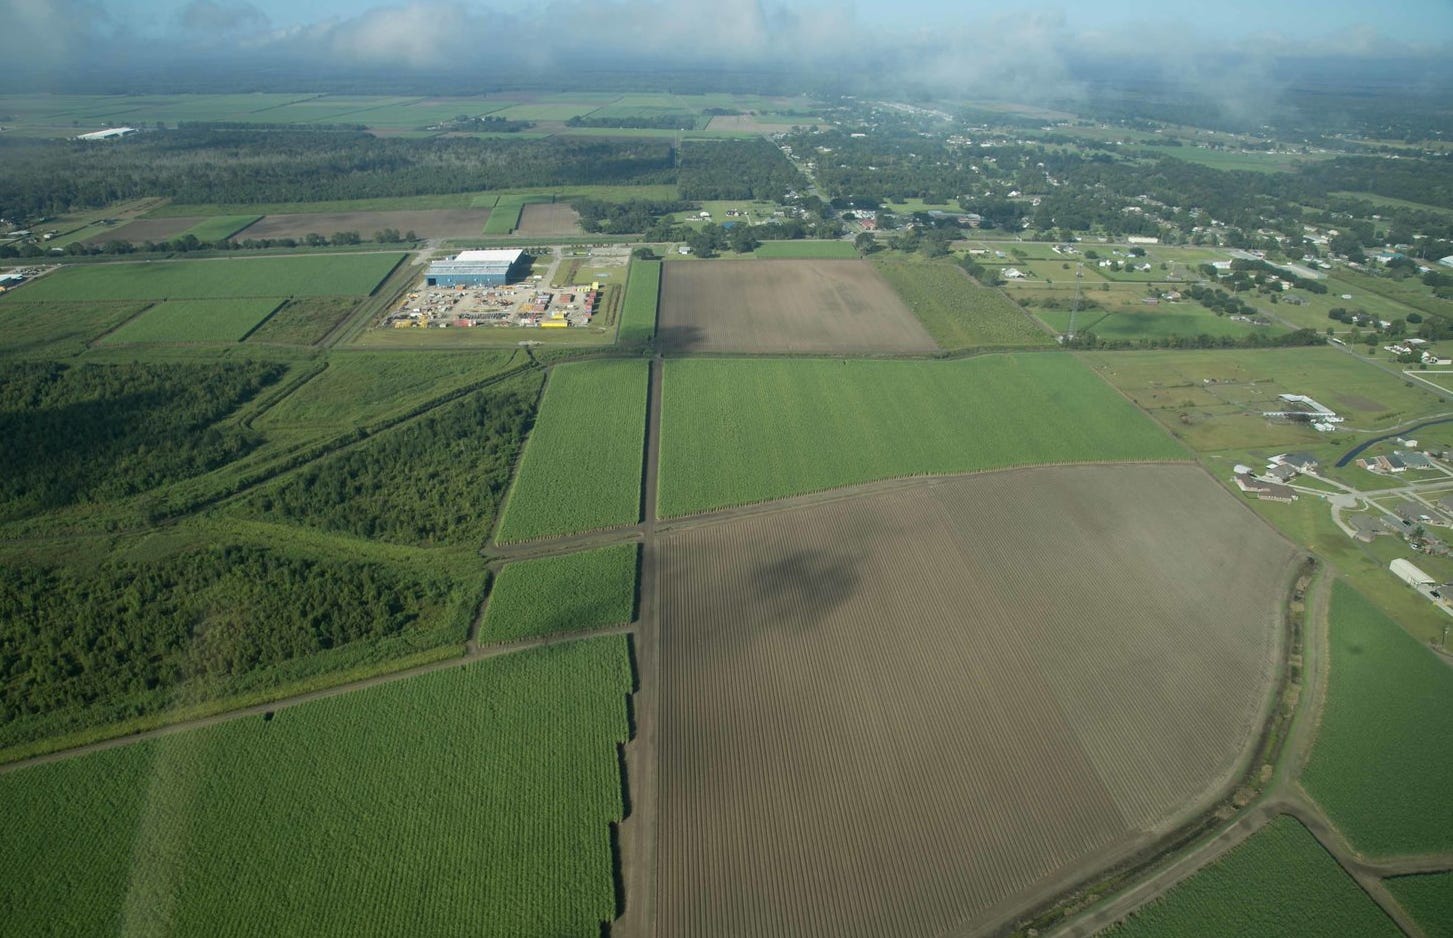 The planned site of the resettlement community for Isle de Jean Charles residents in Schriever, La.